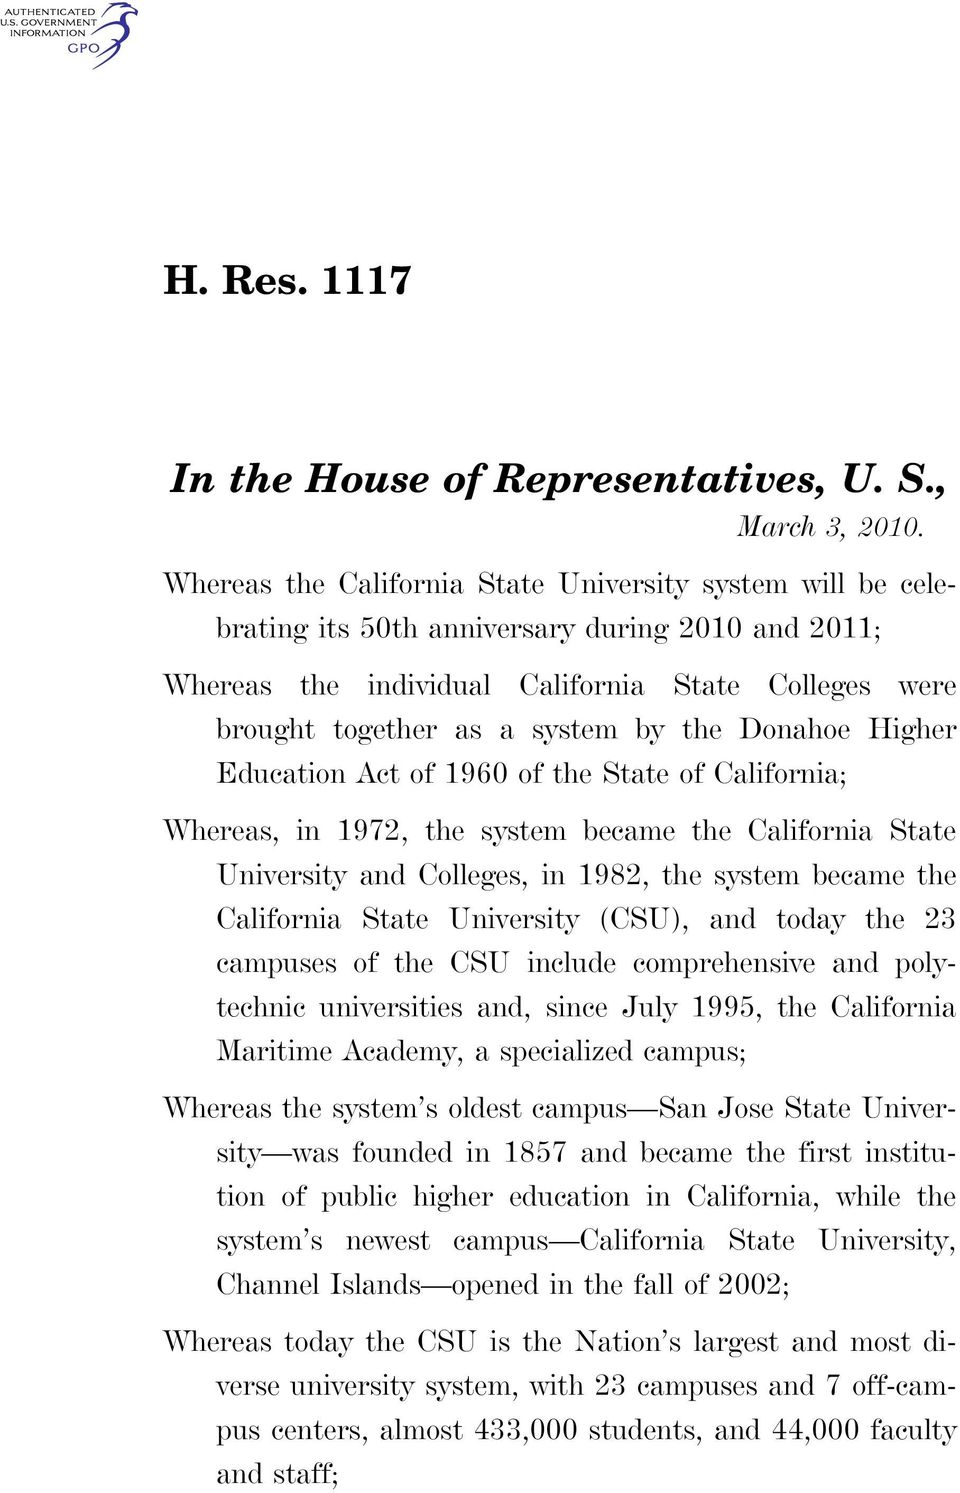 Donahoe Higher Education Act of 1960 of the State of California; Whereas, in 1972, the system became the California State University and Colleges, in 1982, the system became the California State